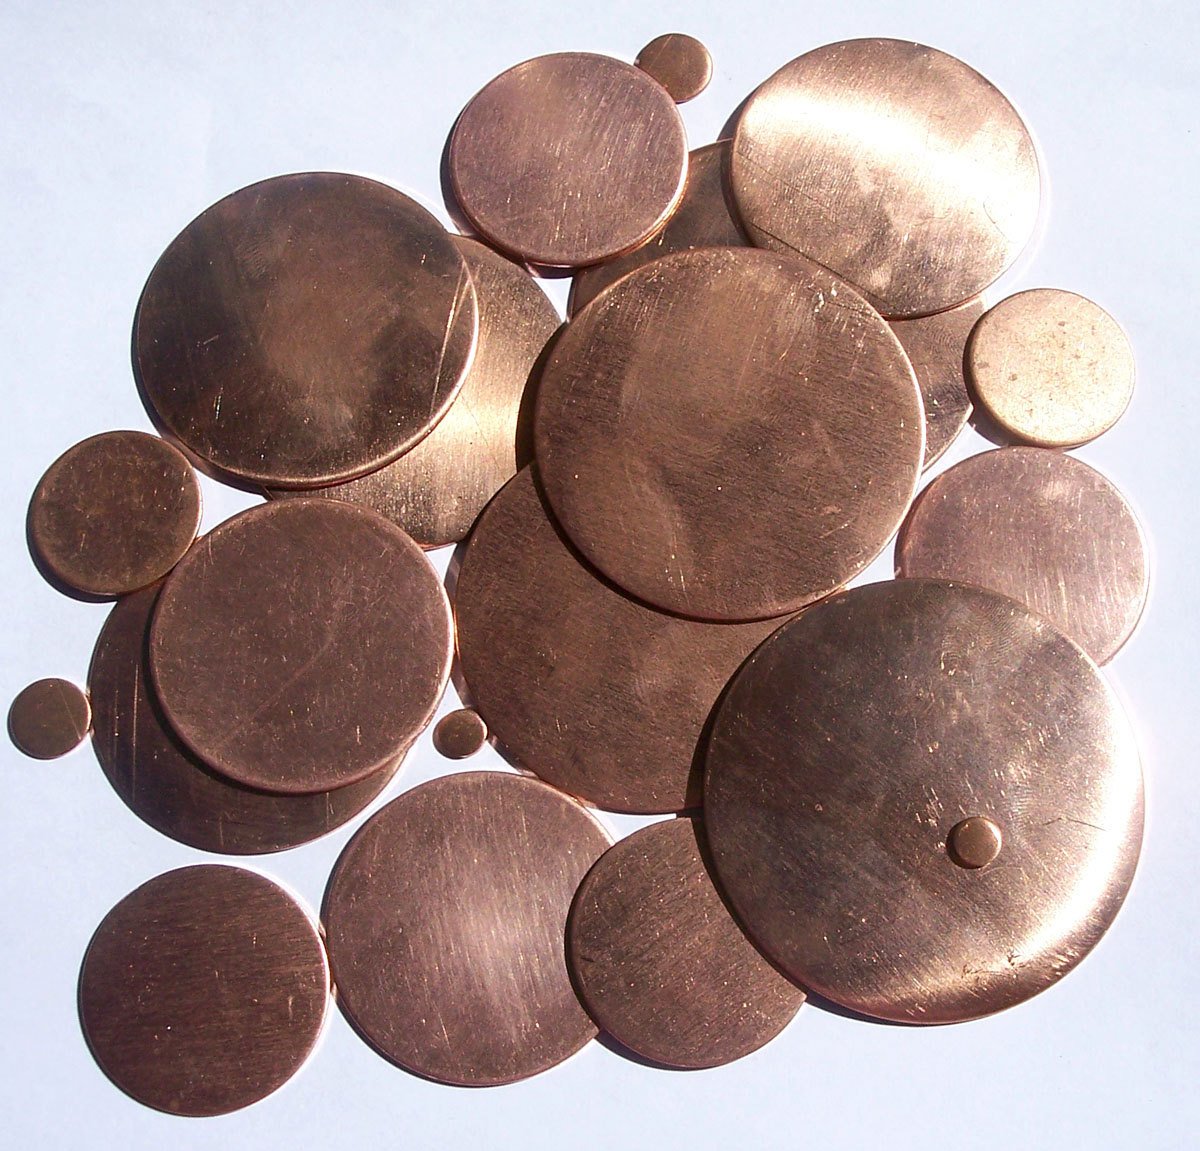 Flat Copper Disc 26mm 26G Metal Blank - Jewelry Supplies - 5 Pieces